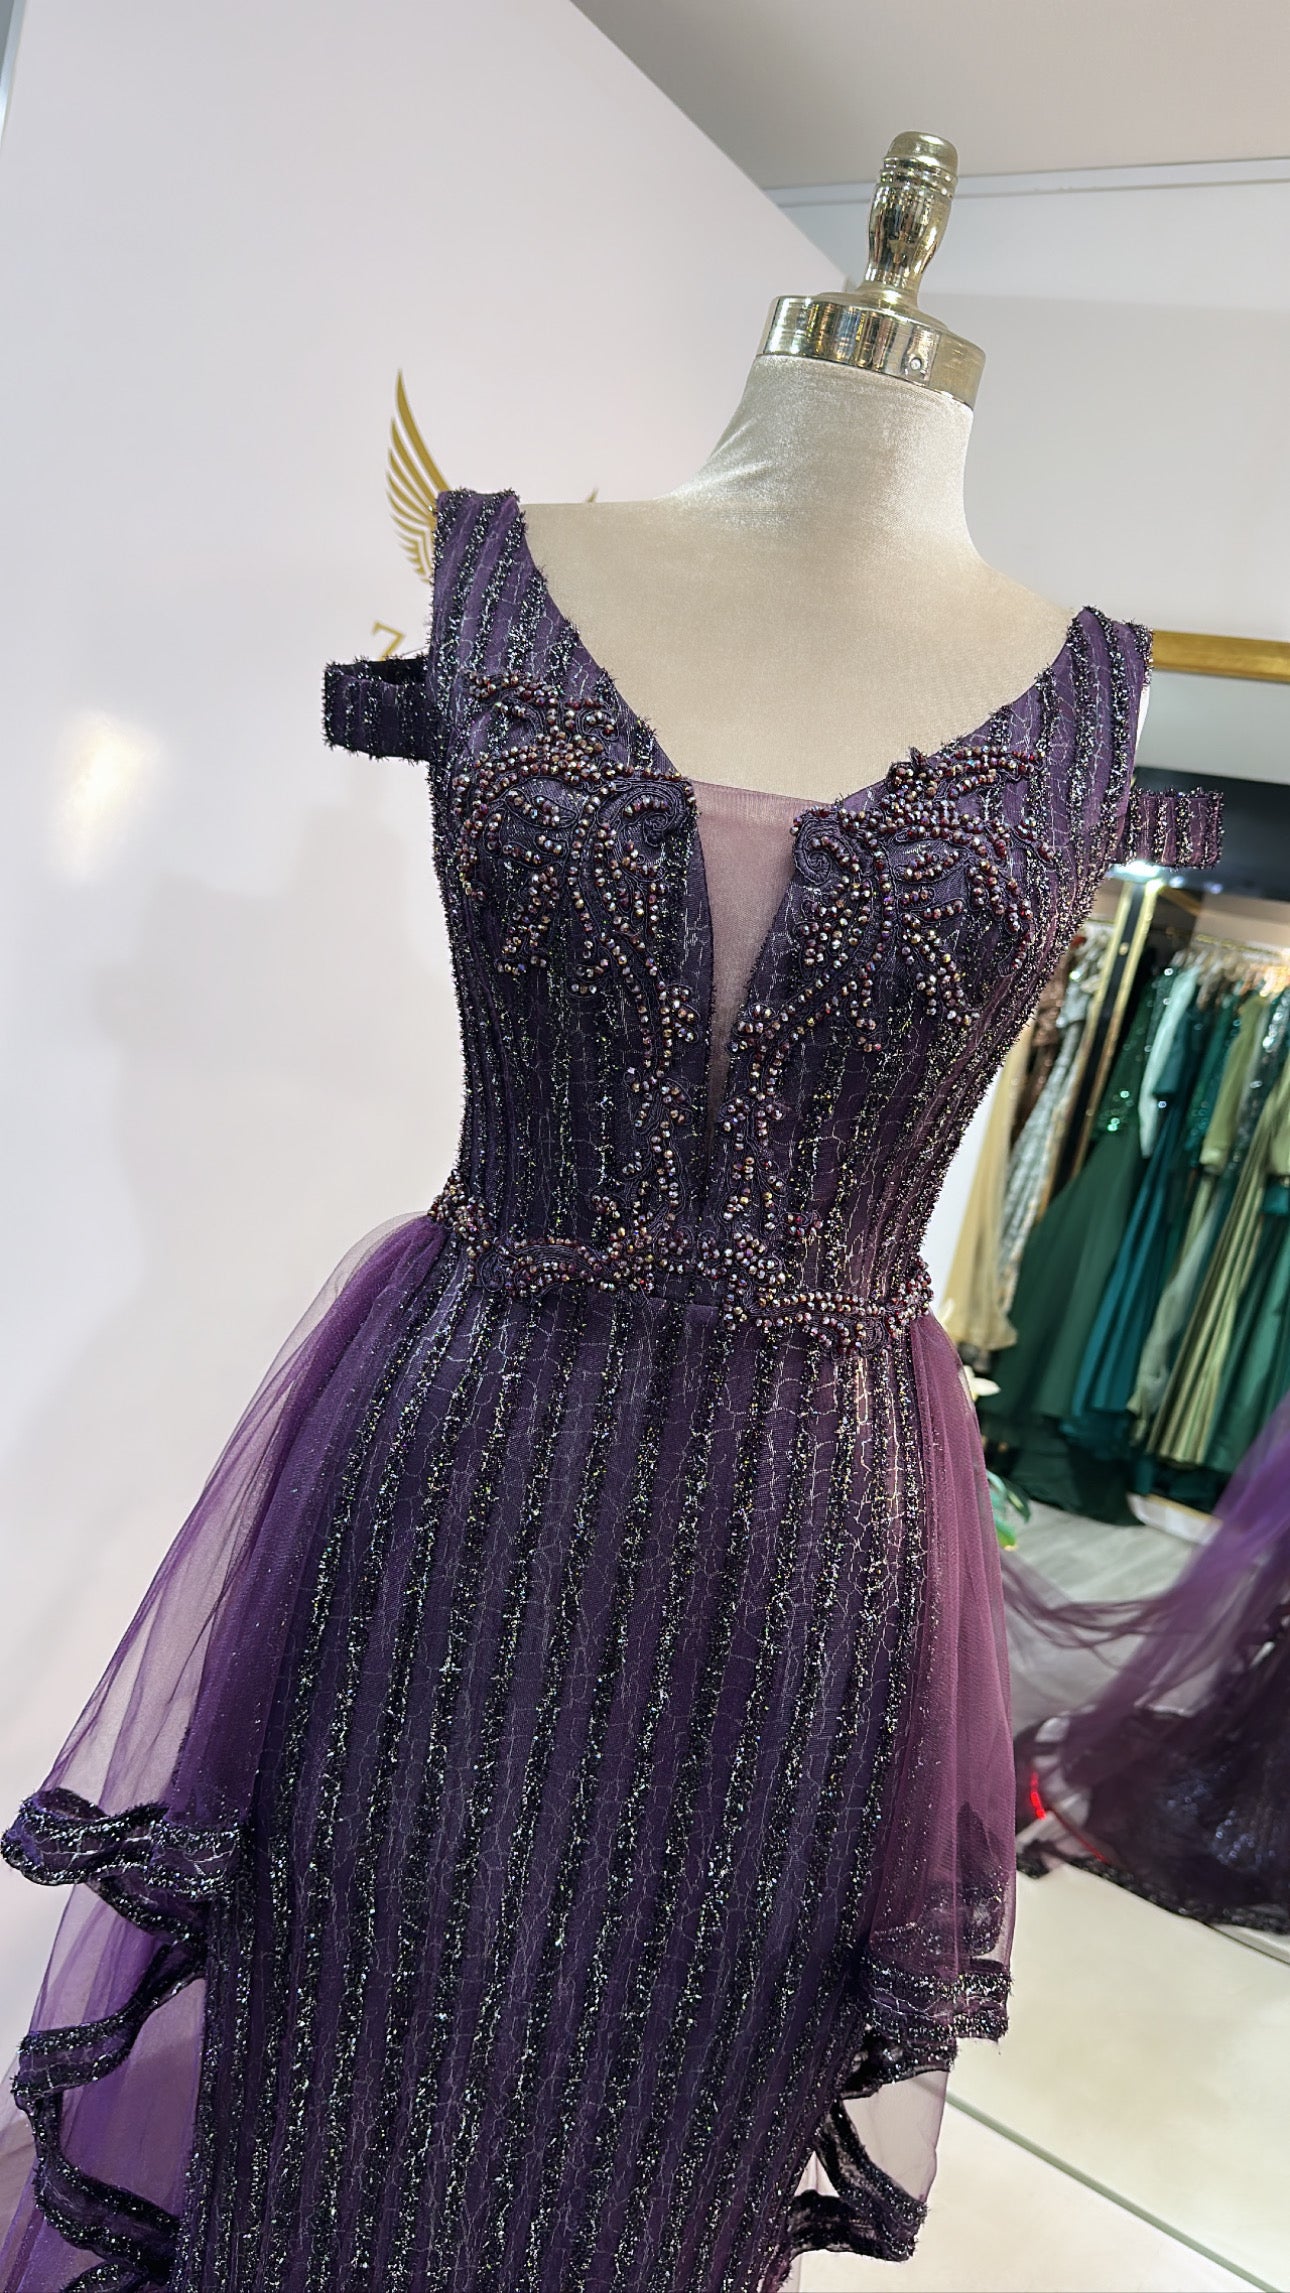 Elegant purple dress design, decorated with beads, tulle train